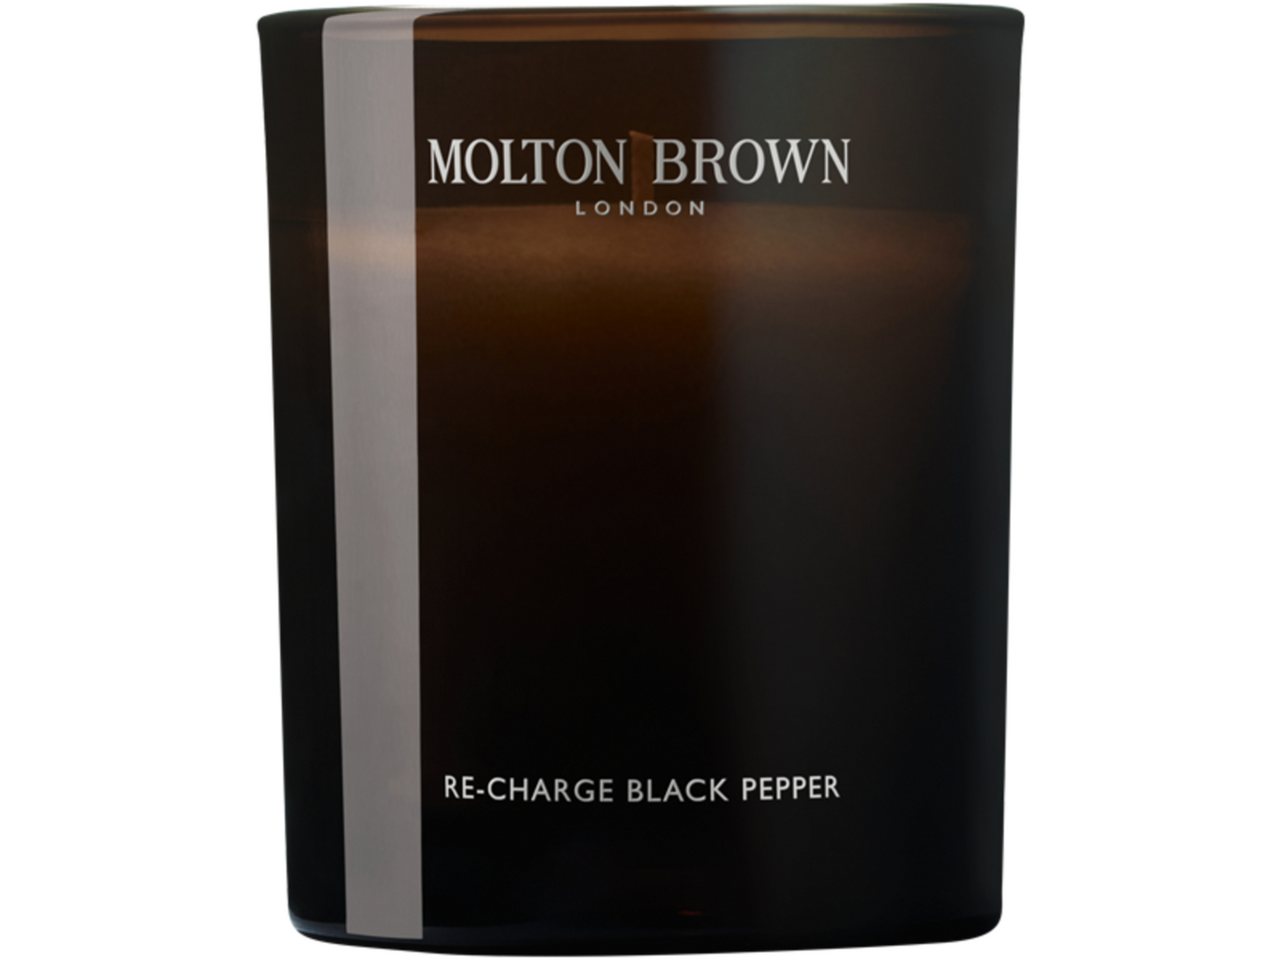 Molton Brown Duftkerze Re-Charge Black Pepper Single Wick Candle von Molton Brown